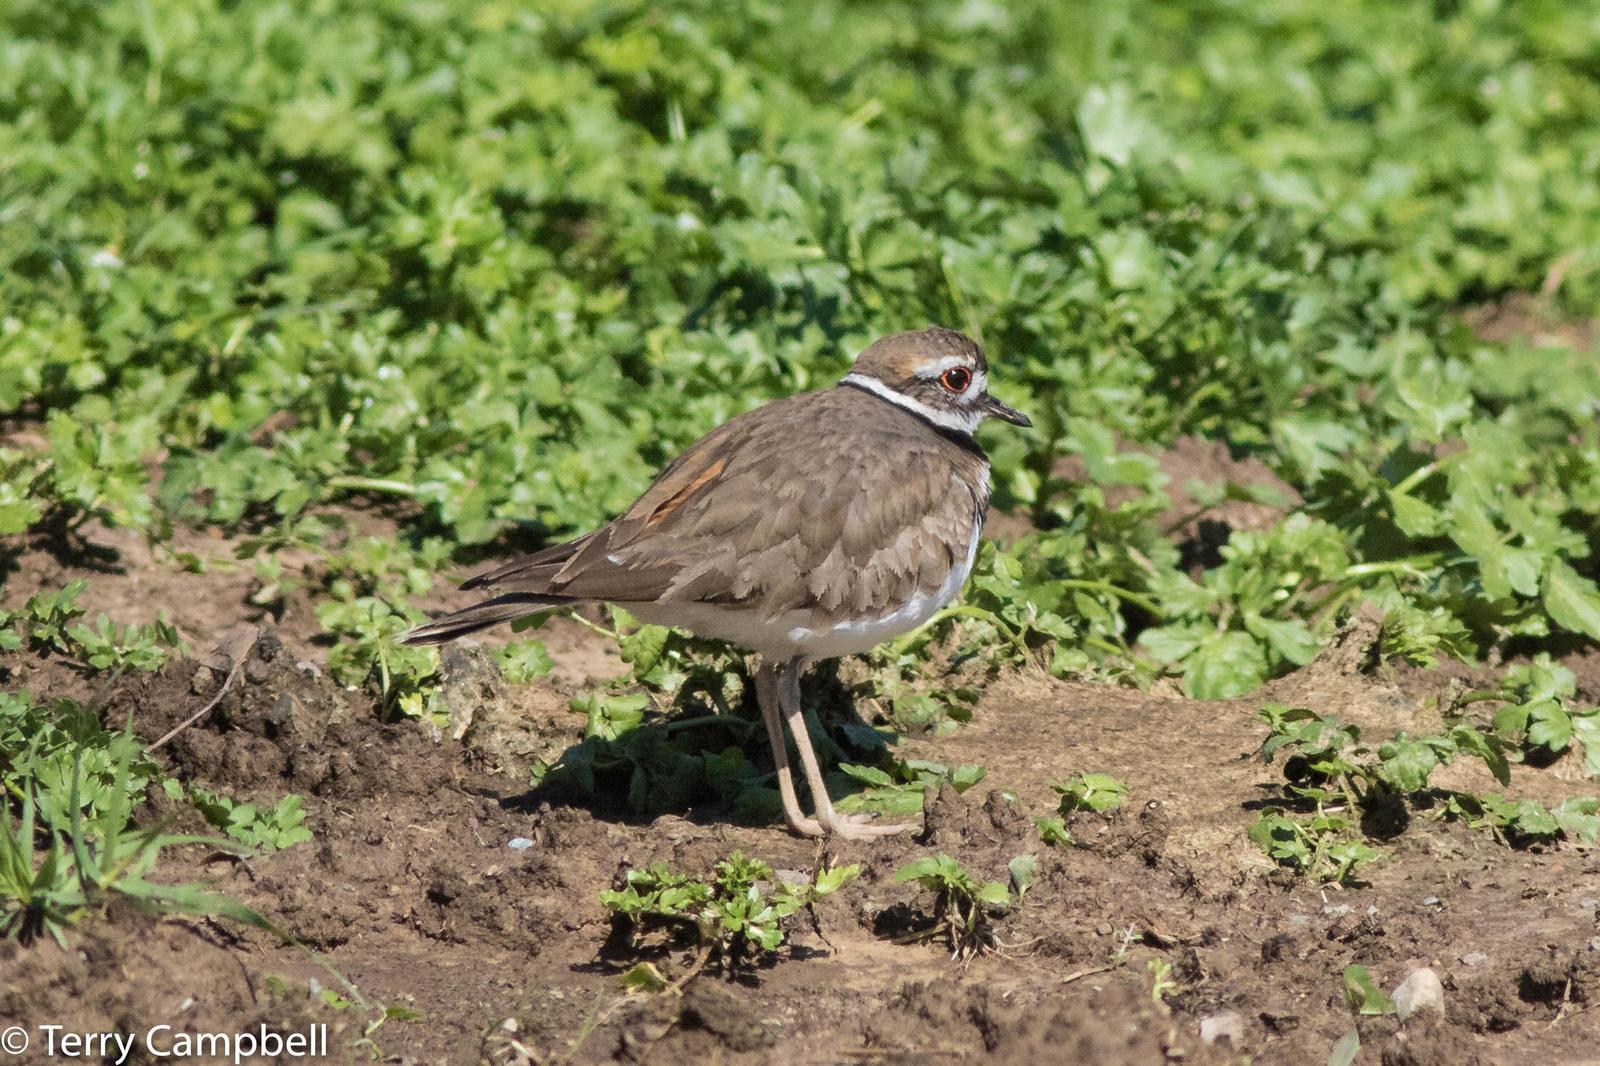 Killdeer Photo by Terry Campbell